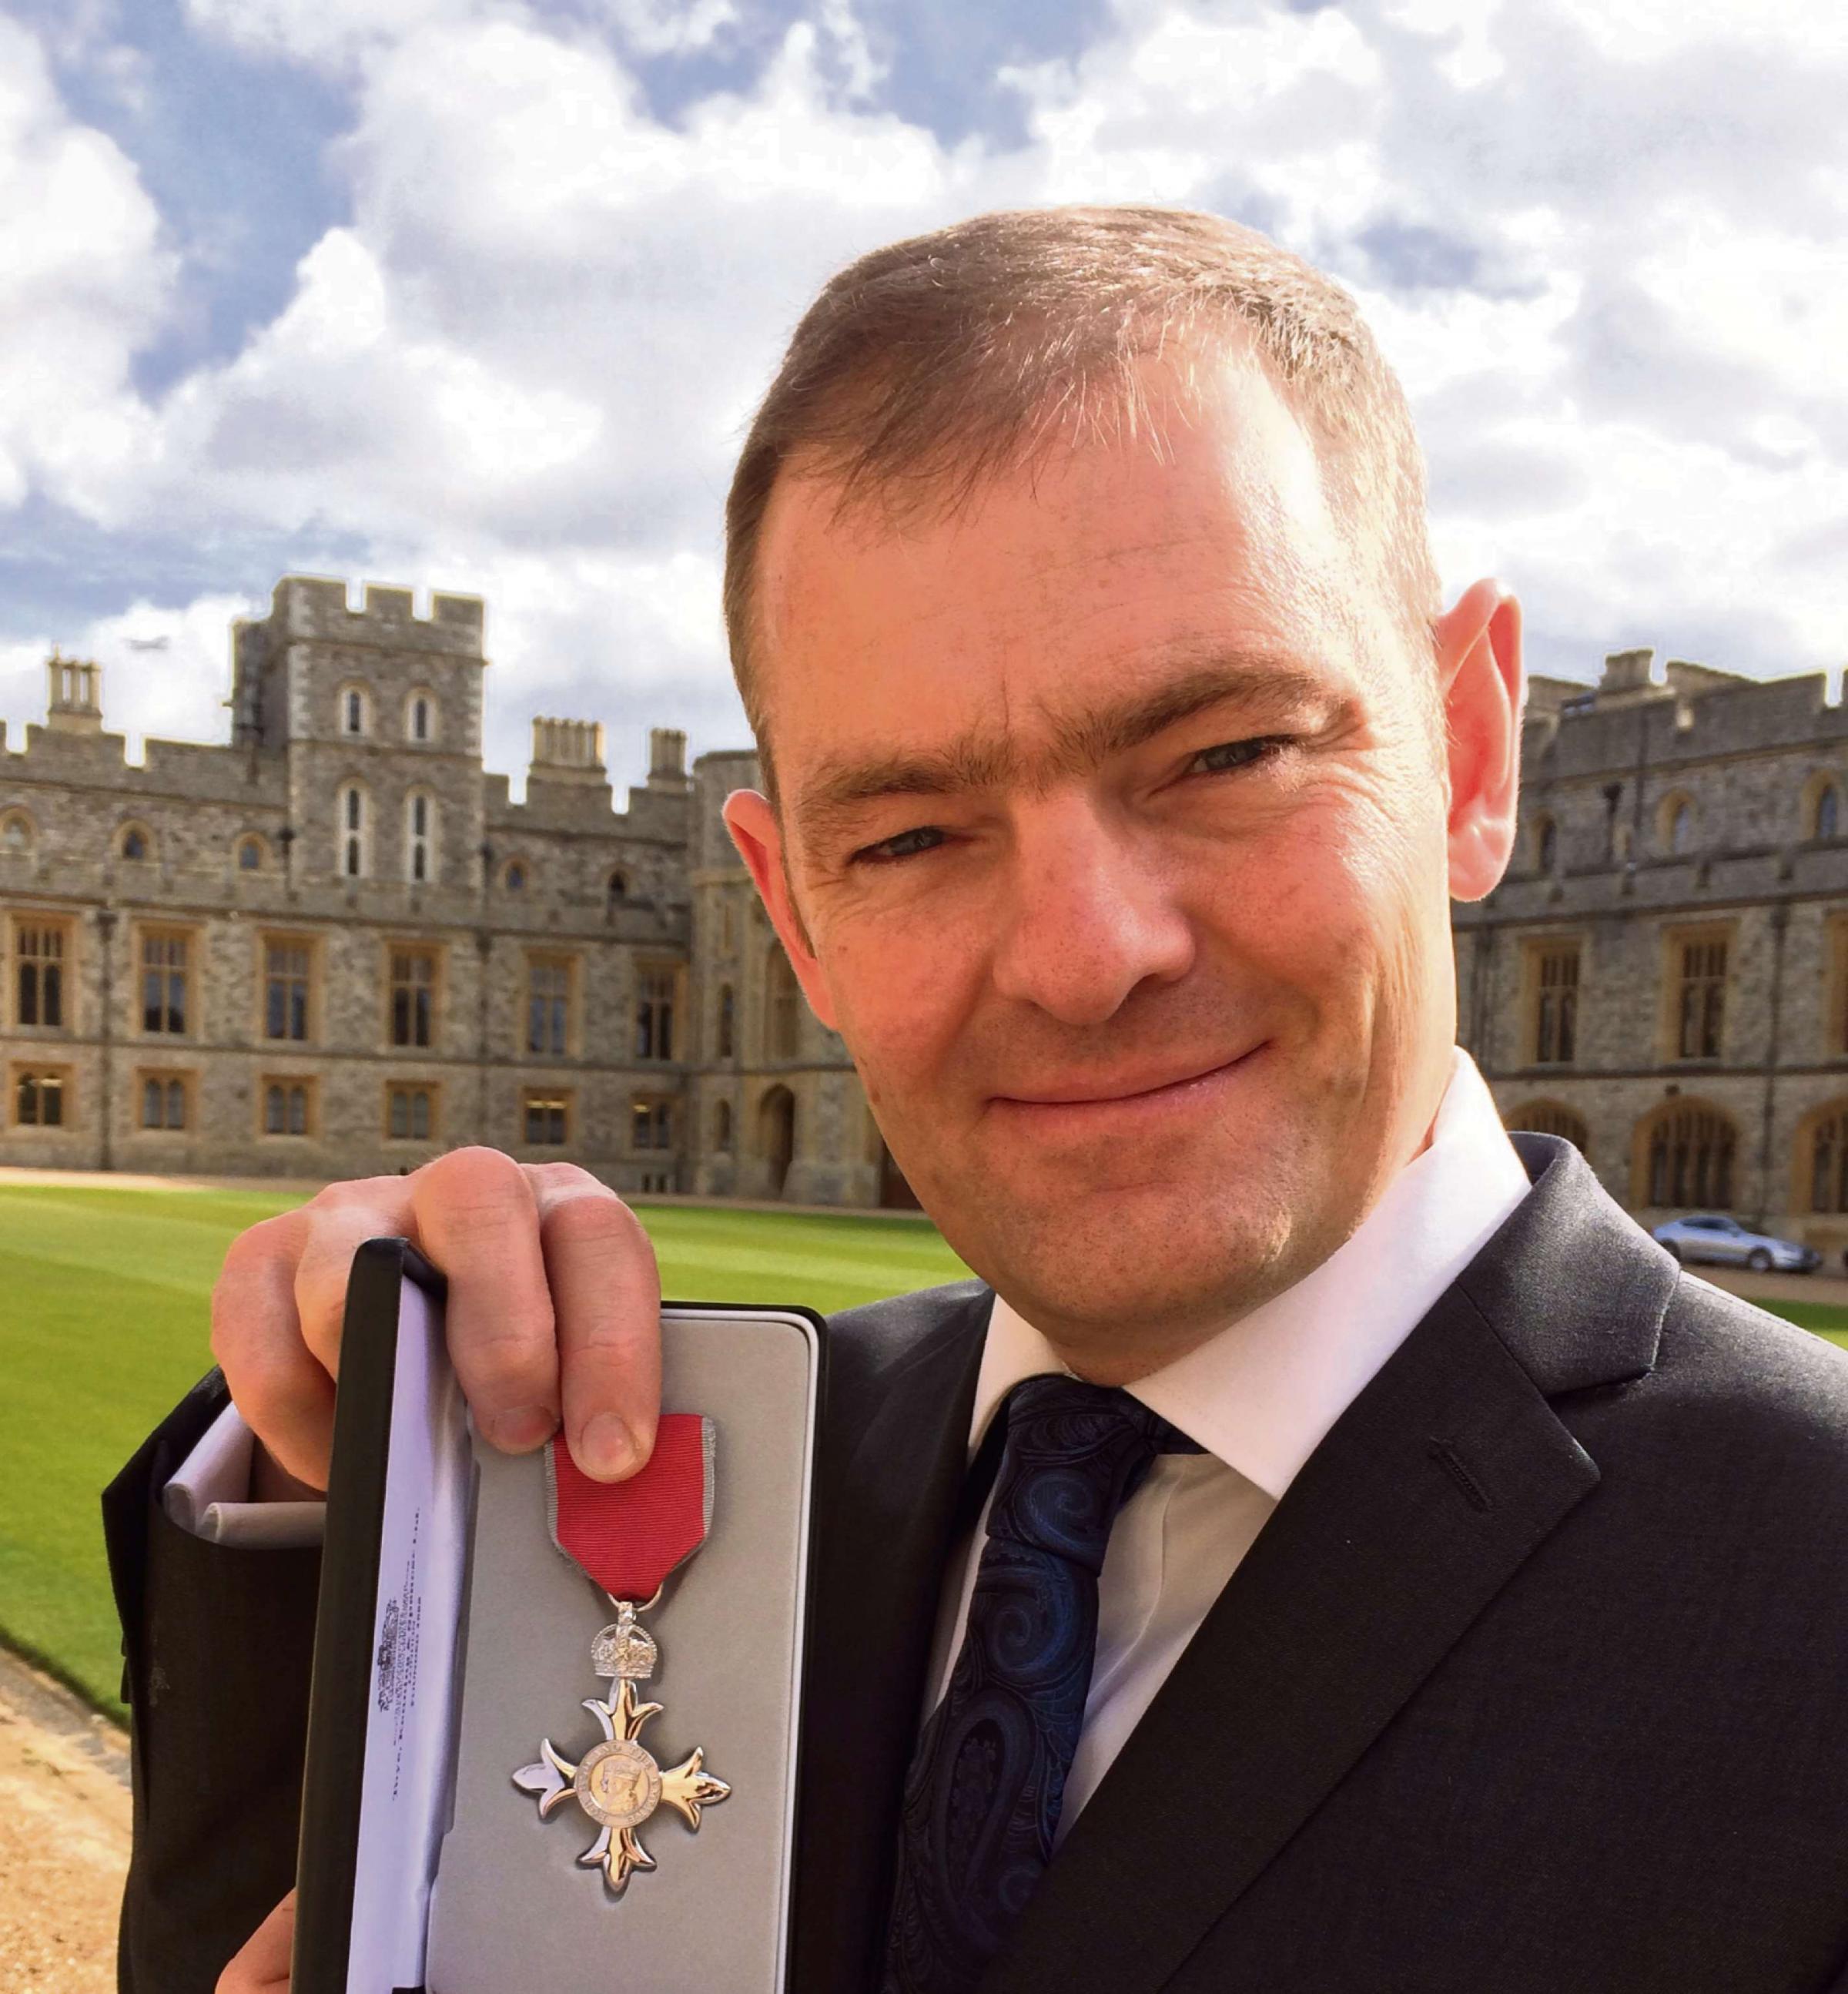 Malcolm Russell has been awarded an MBE for going above and beyond to help others - 2910623